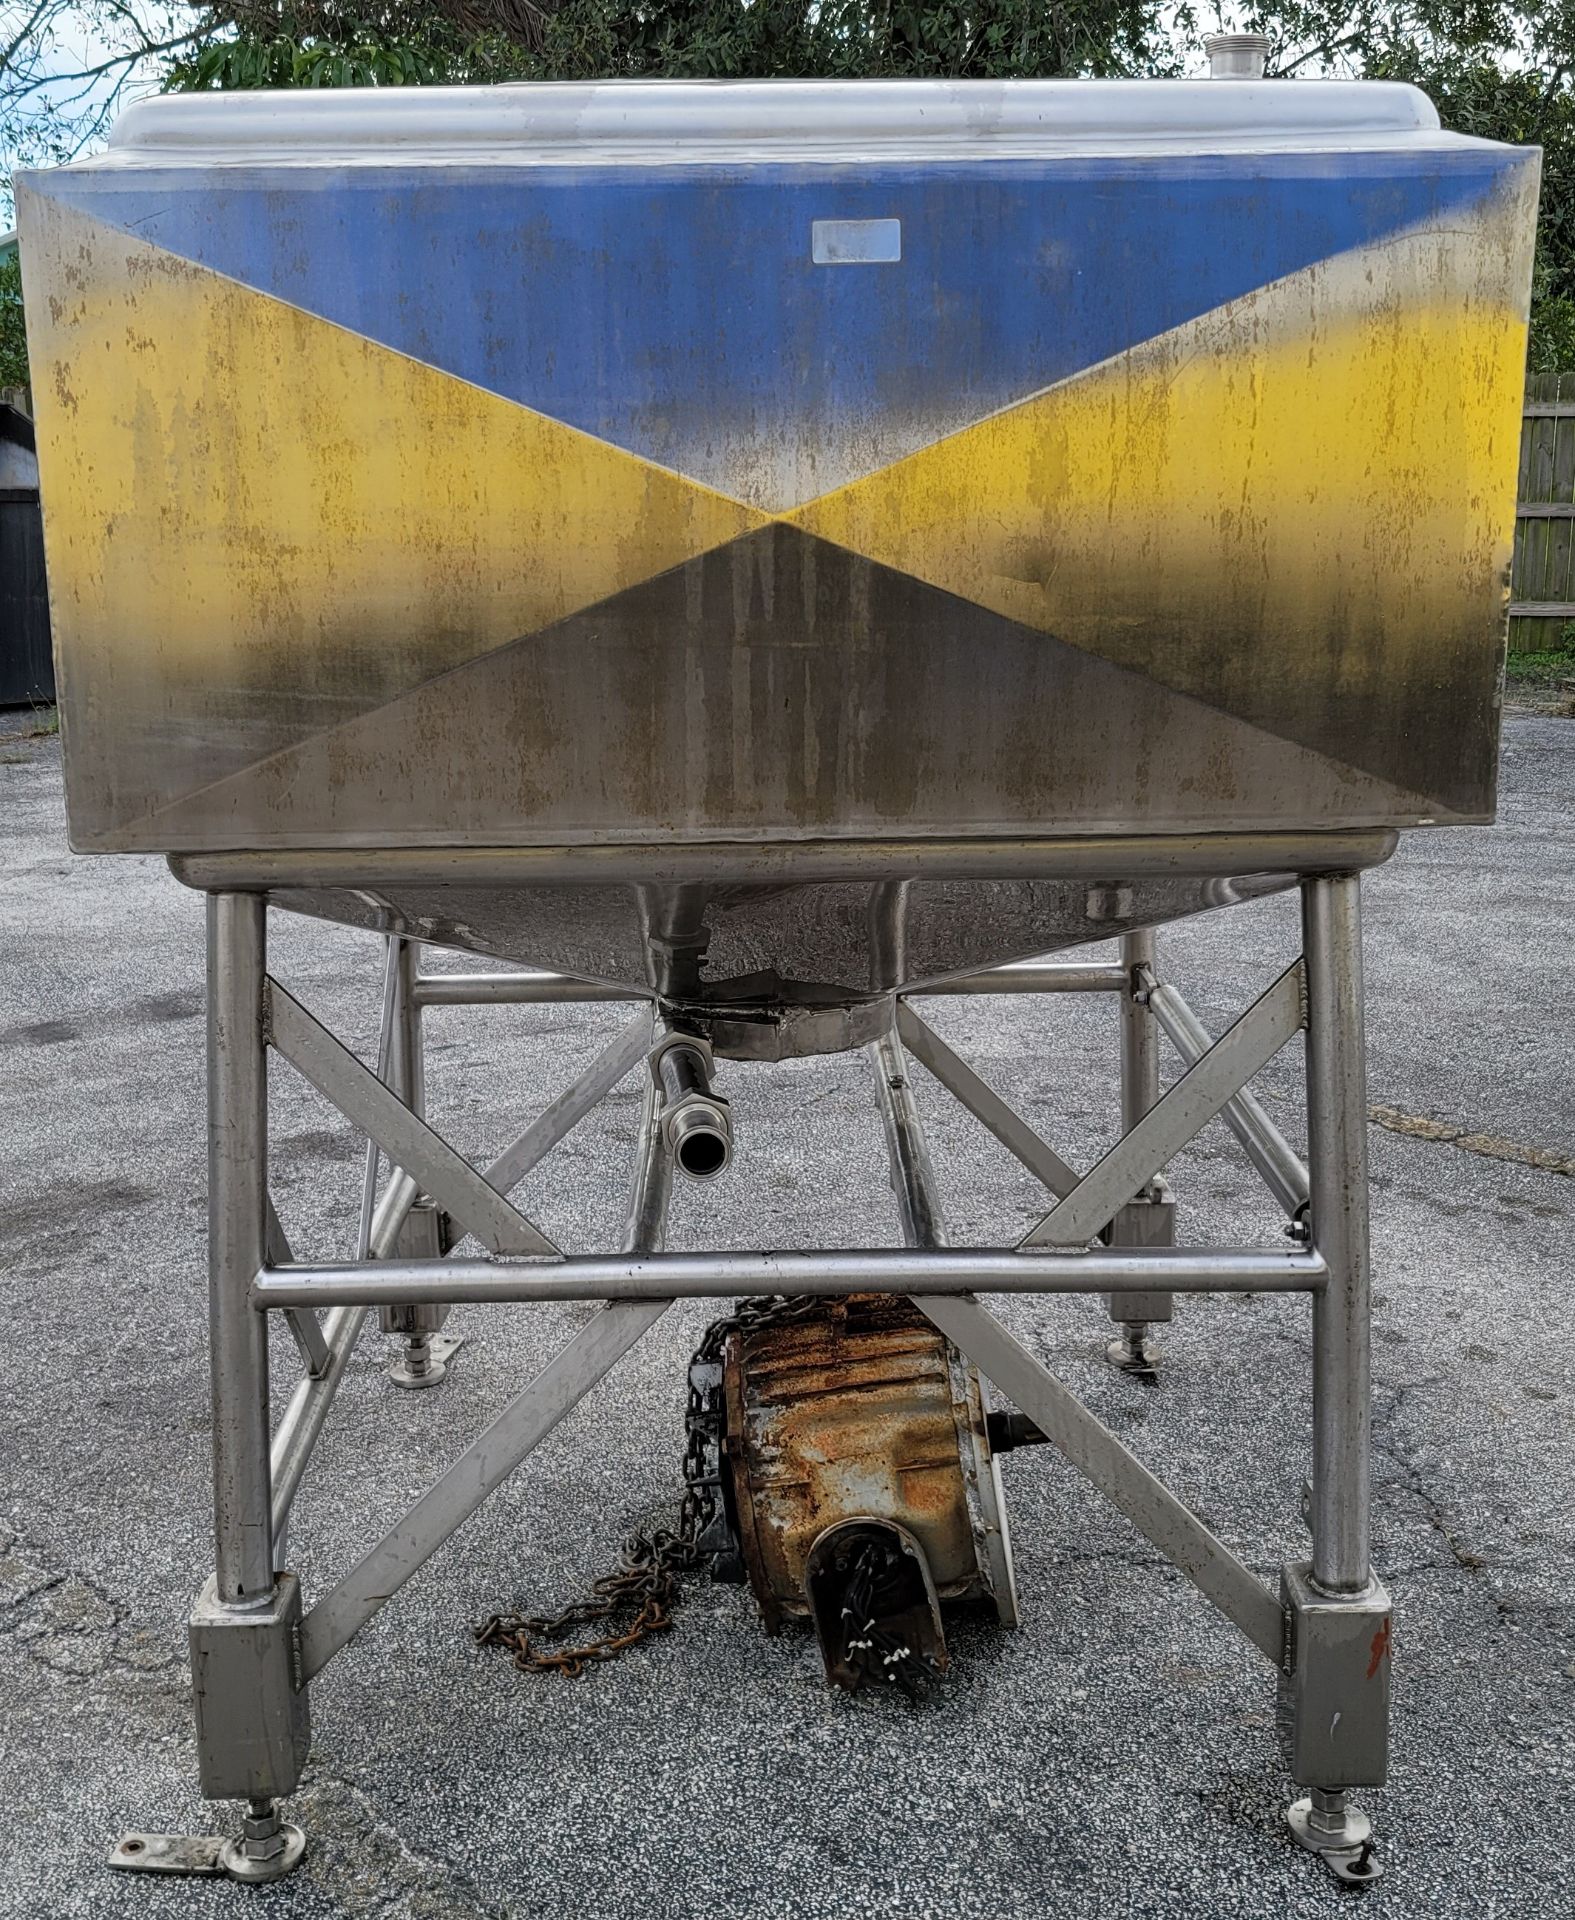 (Located in Belle Glade, FL) BREDDO 250GAL JACKETED LIQUIFIER, SERIAL: 05-591-AD, Rigging/Loading - Image 3 of 6